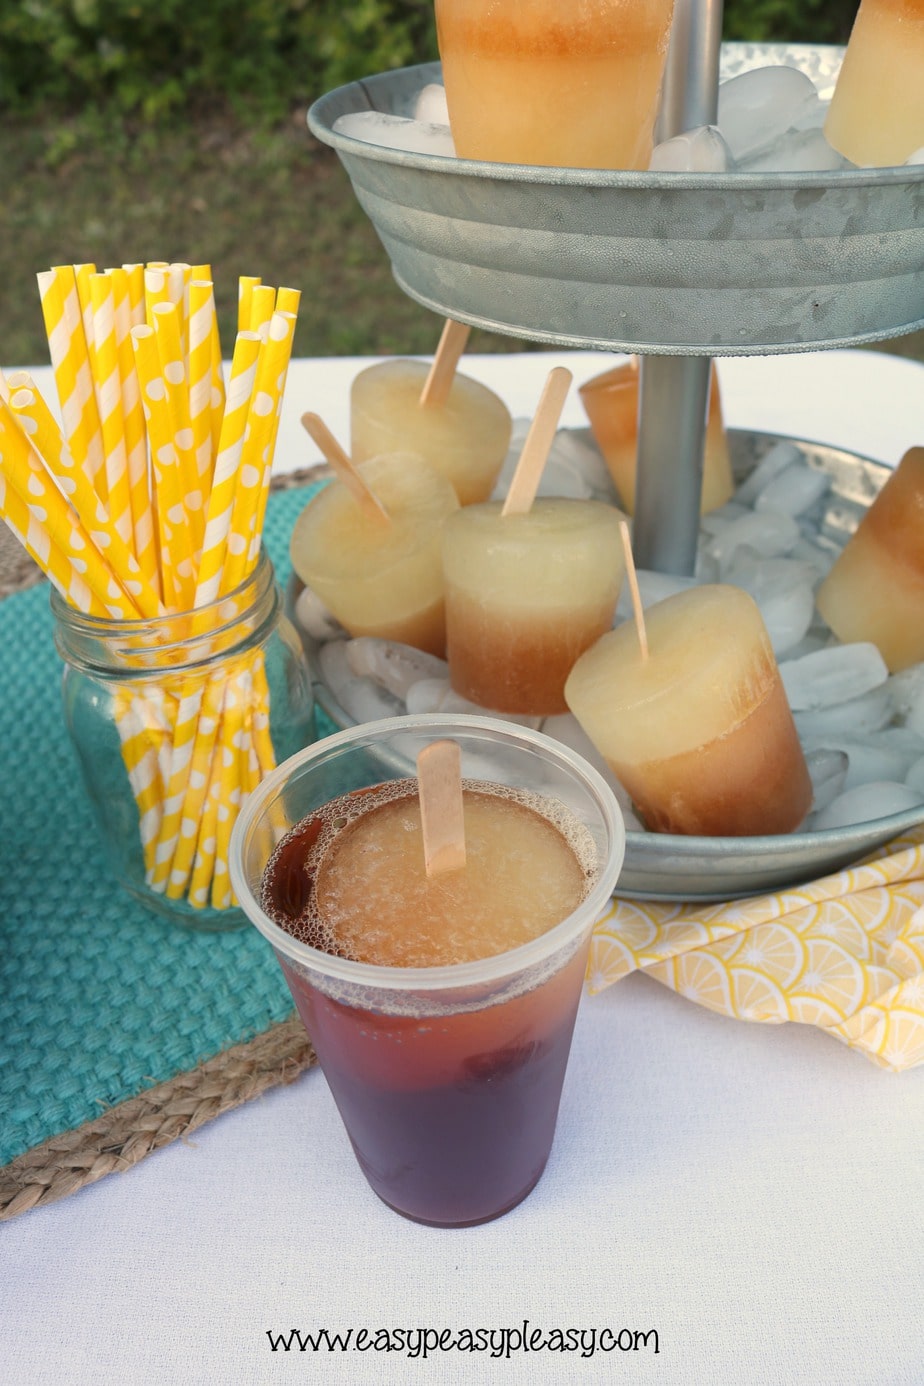 Check out how the kids elevate these Arnold Palmer Popsicles. Kid approved homemade popsicles!